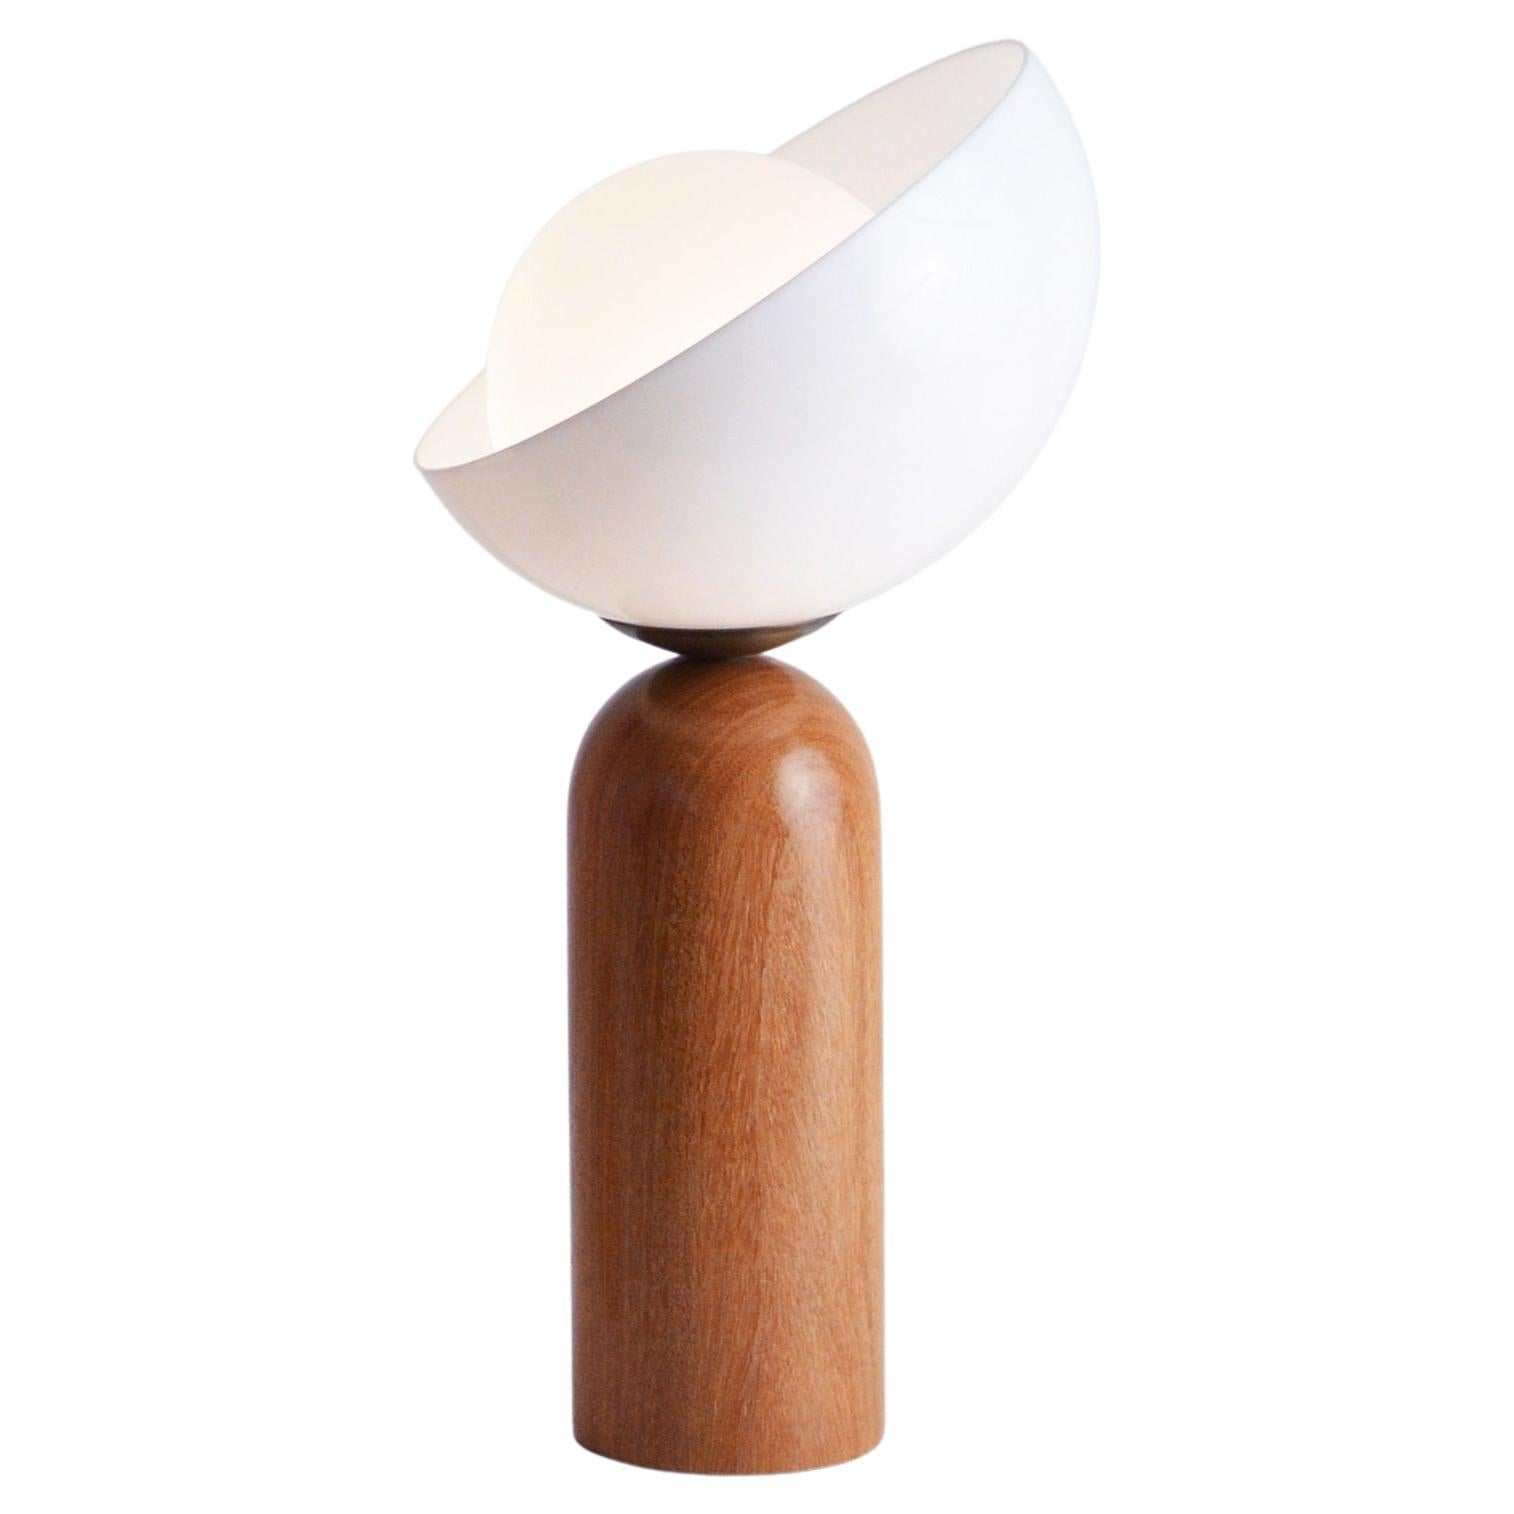 Brazilian contemporary acrylic and wood table lamp - medium For Sale